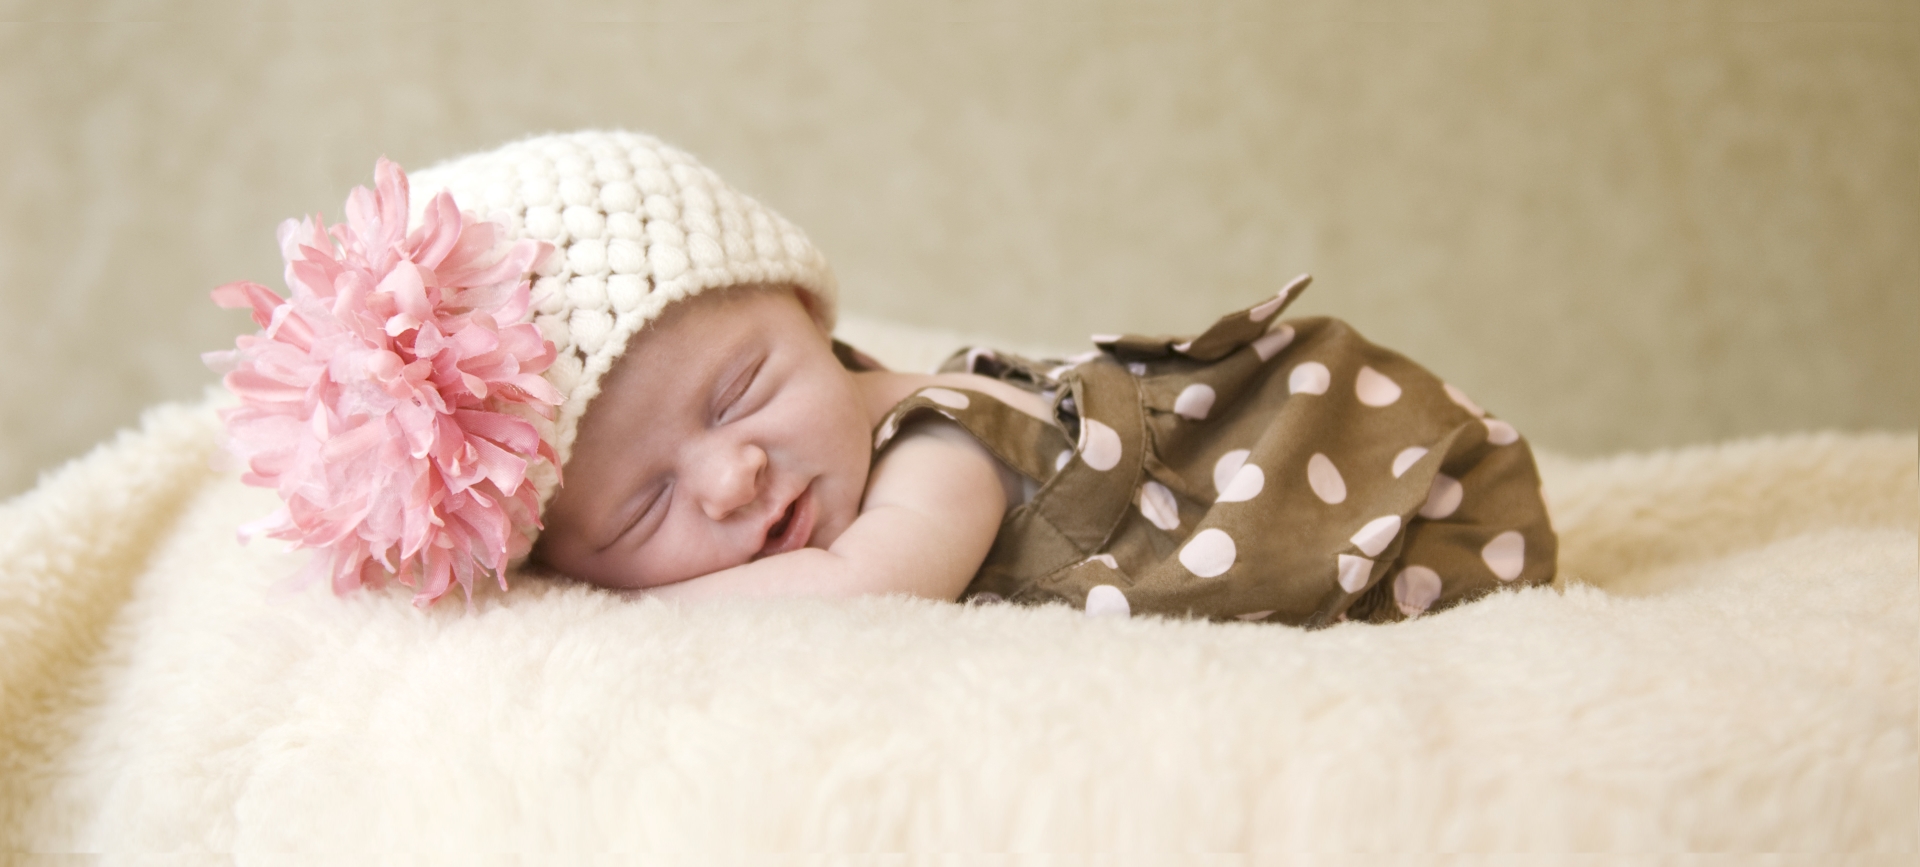 Newborn laying on fur blanket with flower hat.